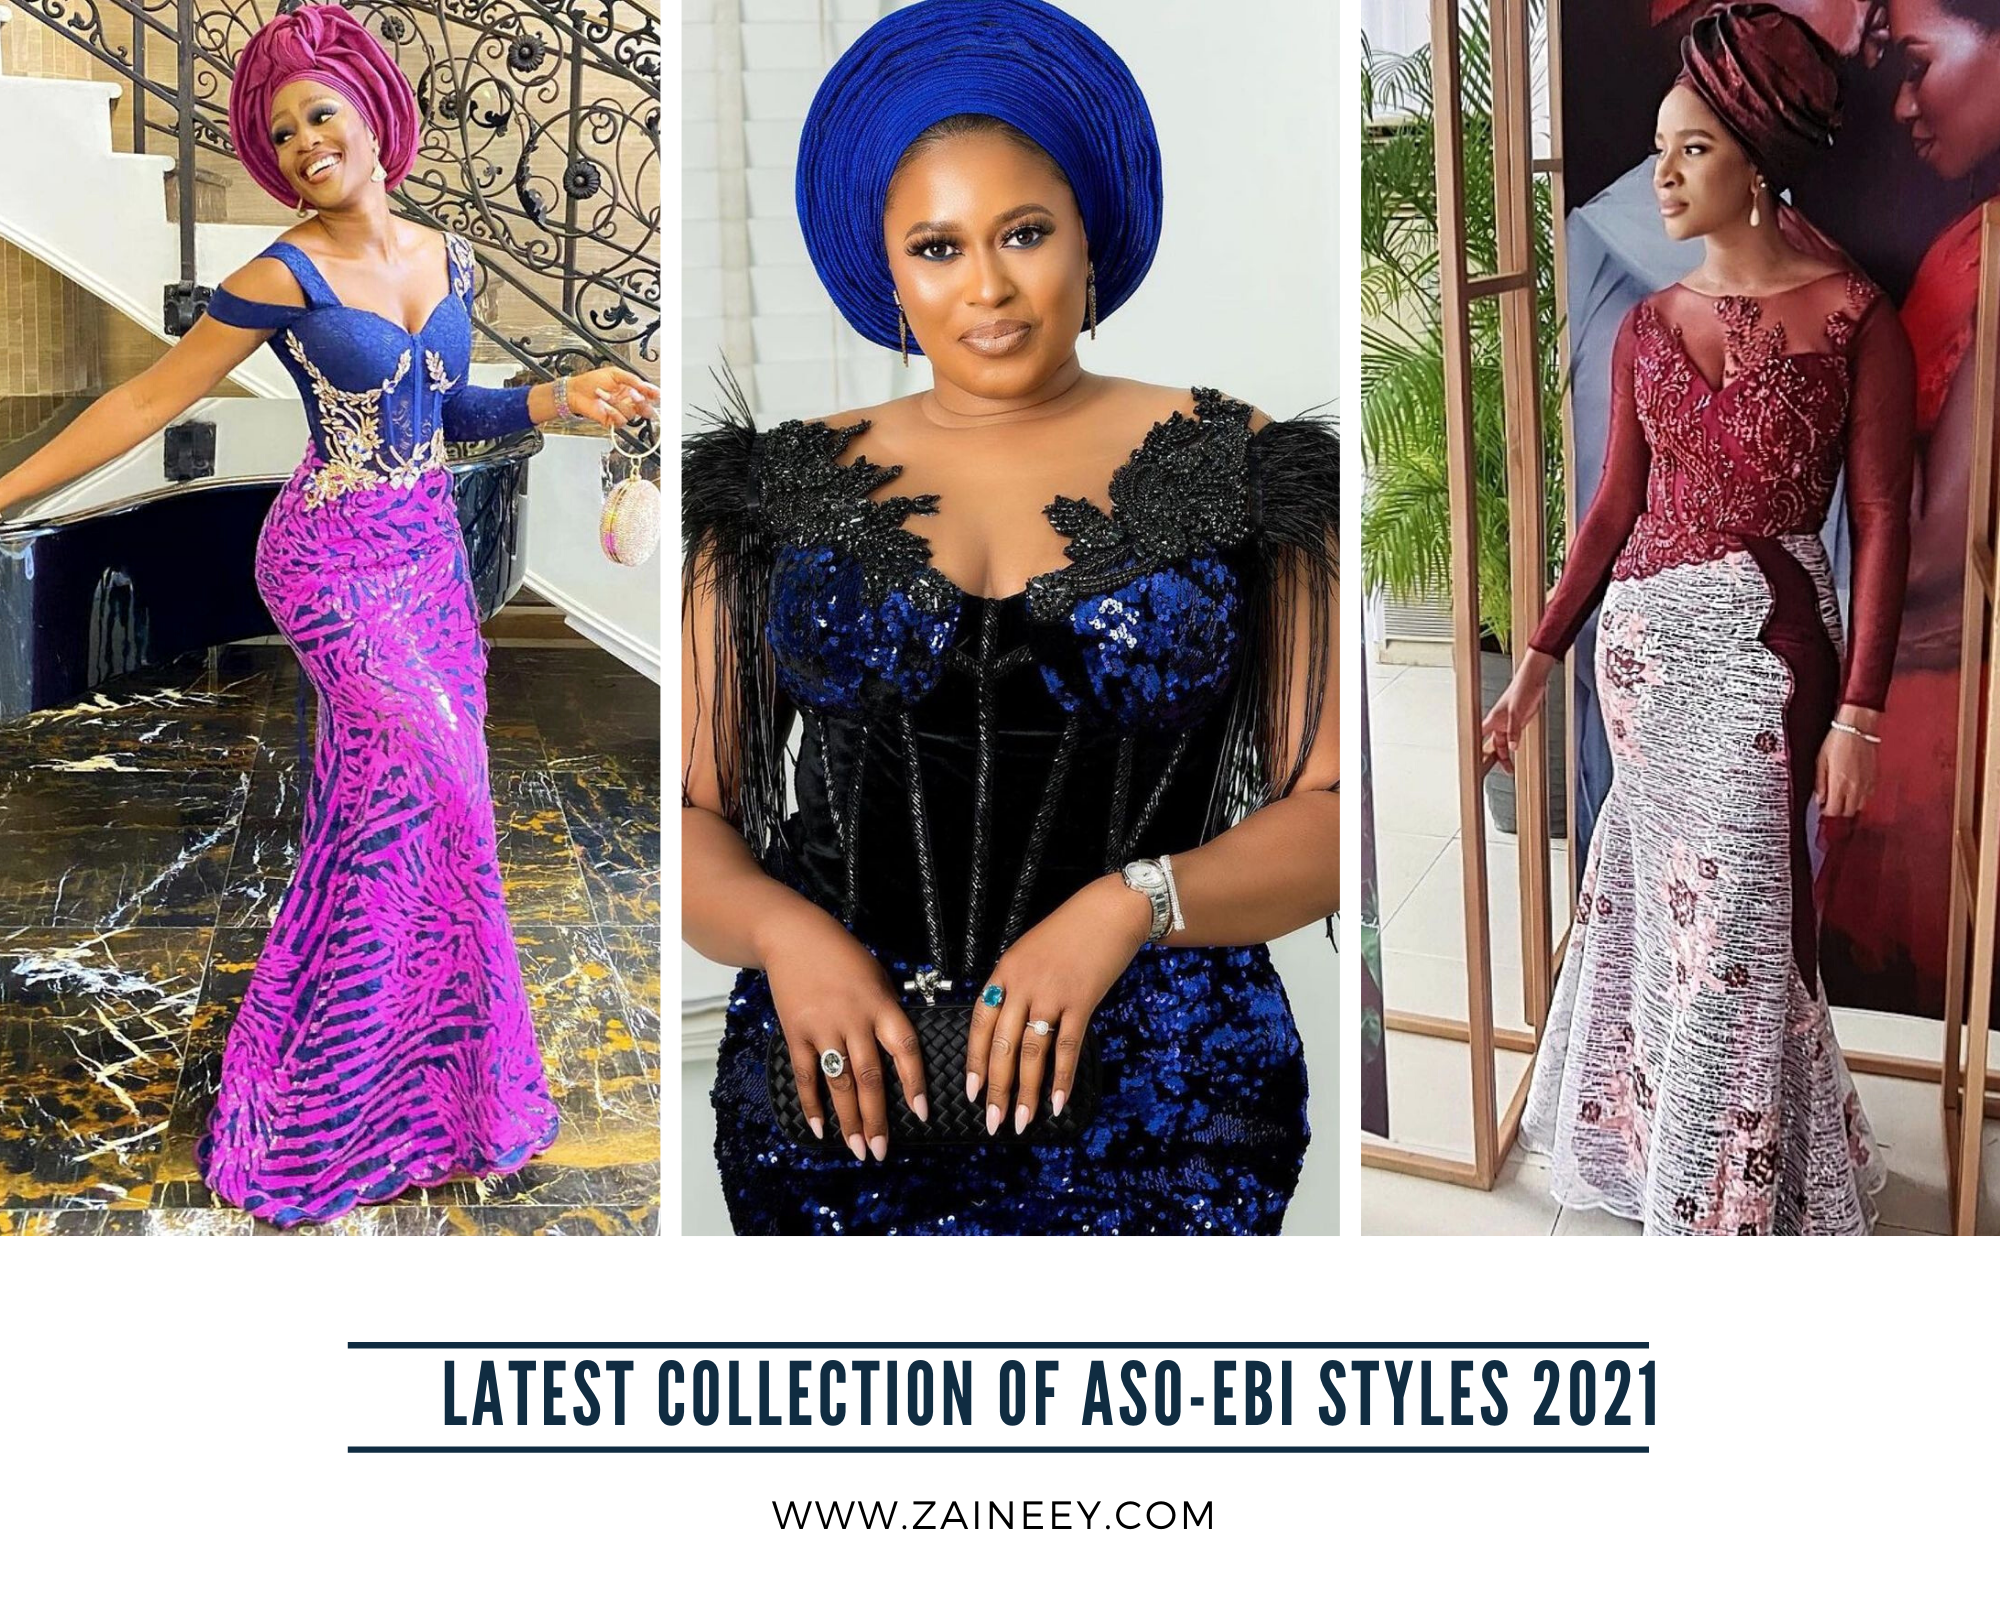 Latest Collection of Aso-Ebi Styles 2021